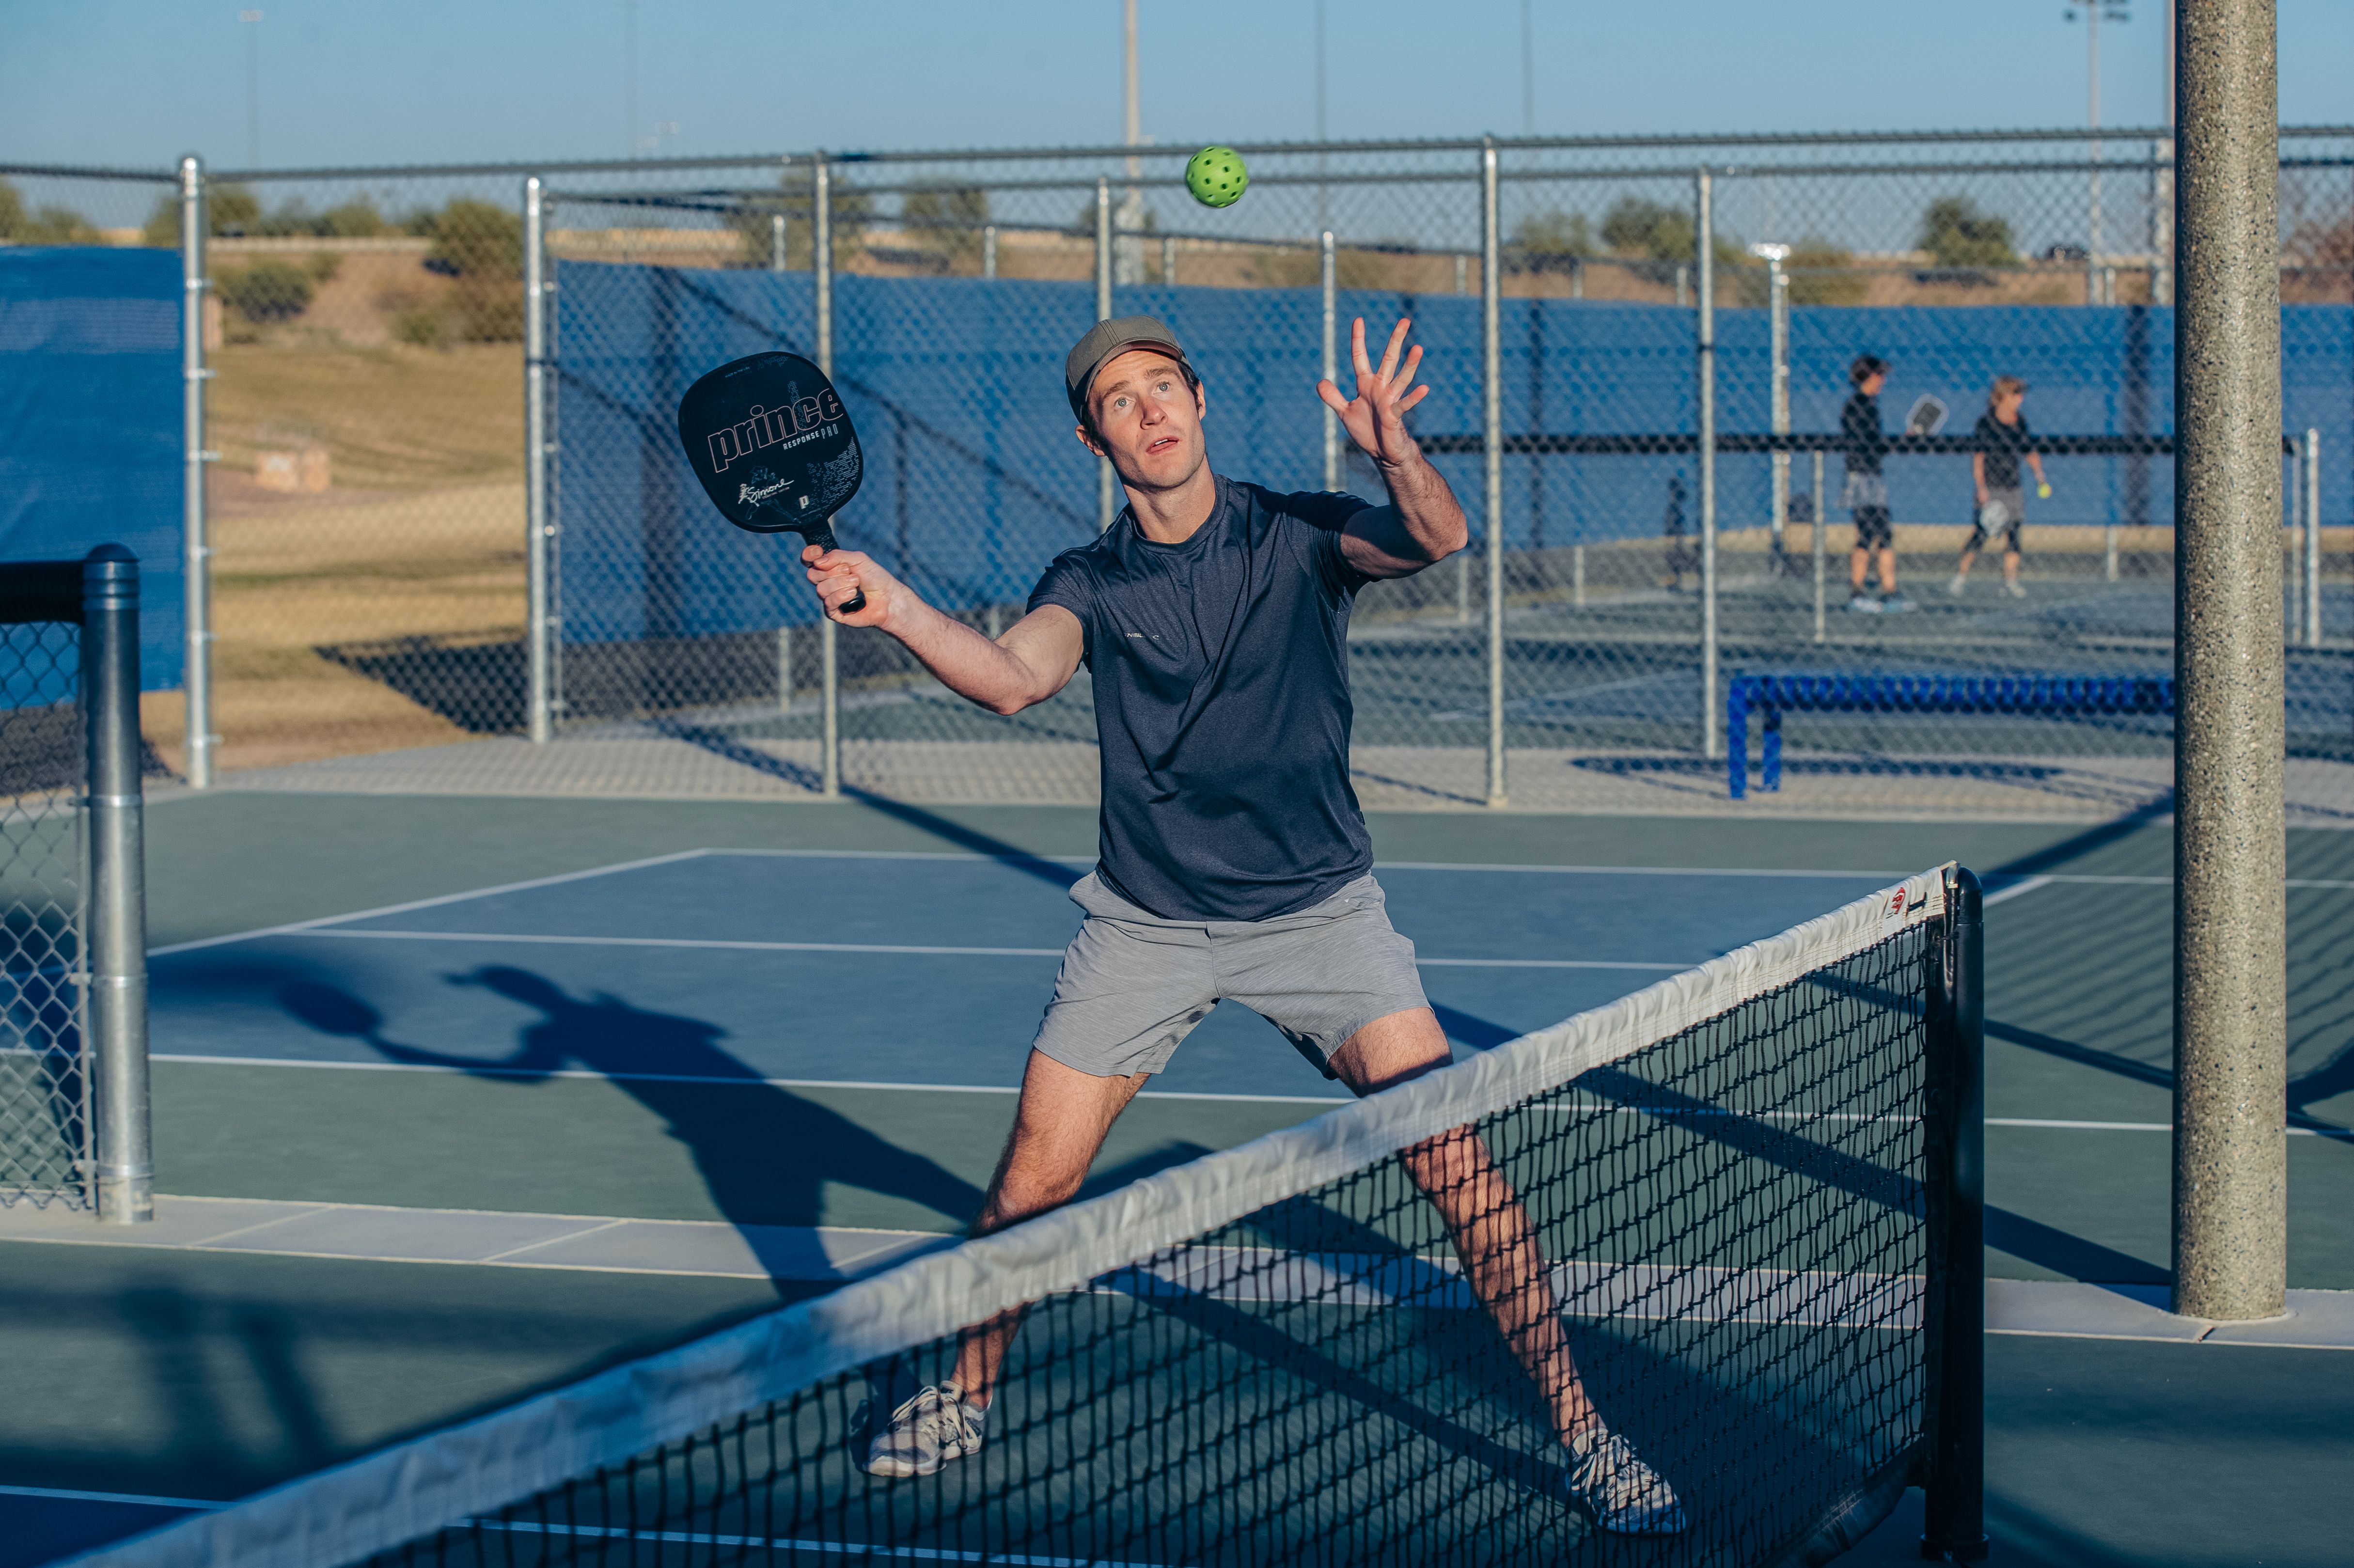 Player hits an erne during a pickleball game